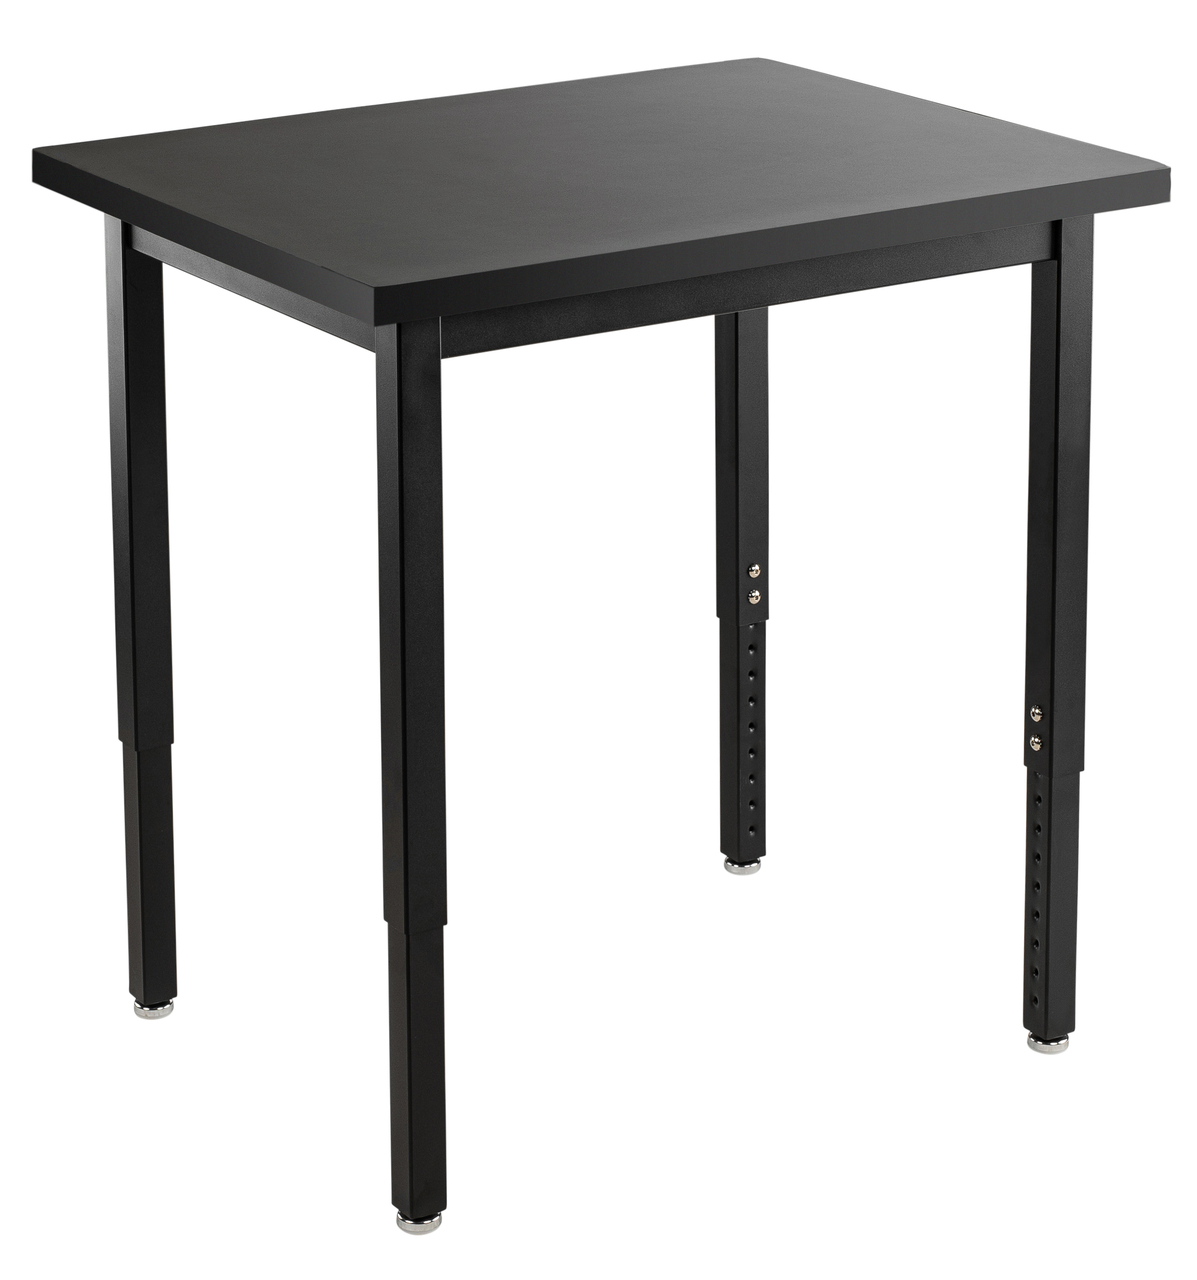 NPS Steel Science Lab Table -  24" x 36" -  Chemical Resistant Top - Black Surface Color